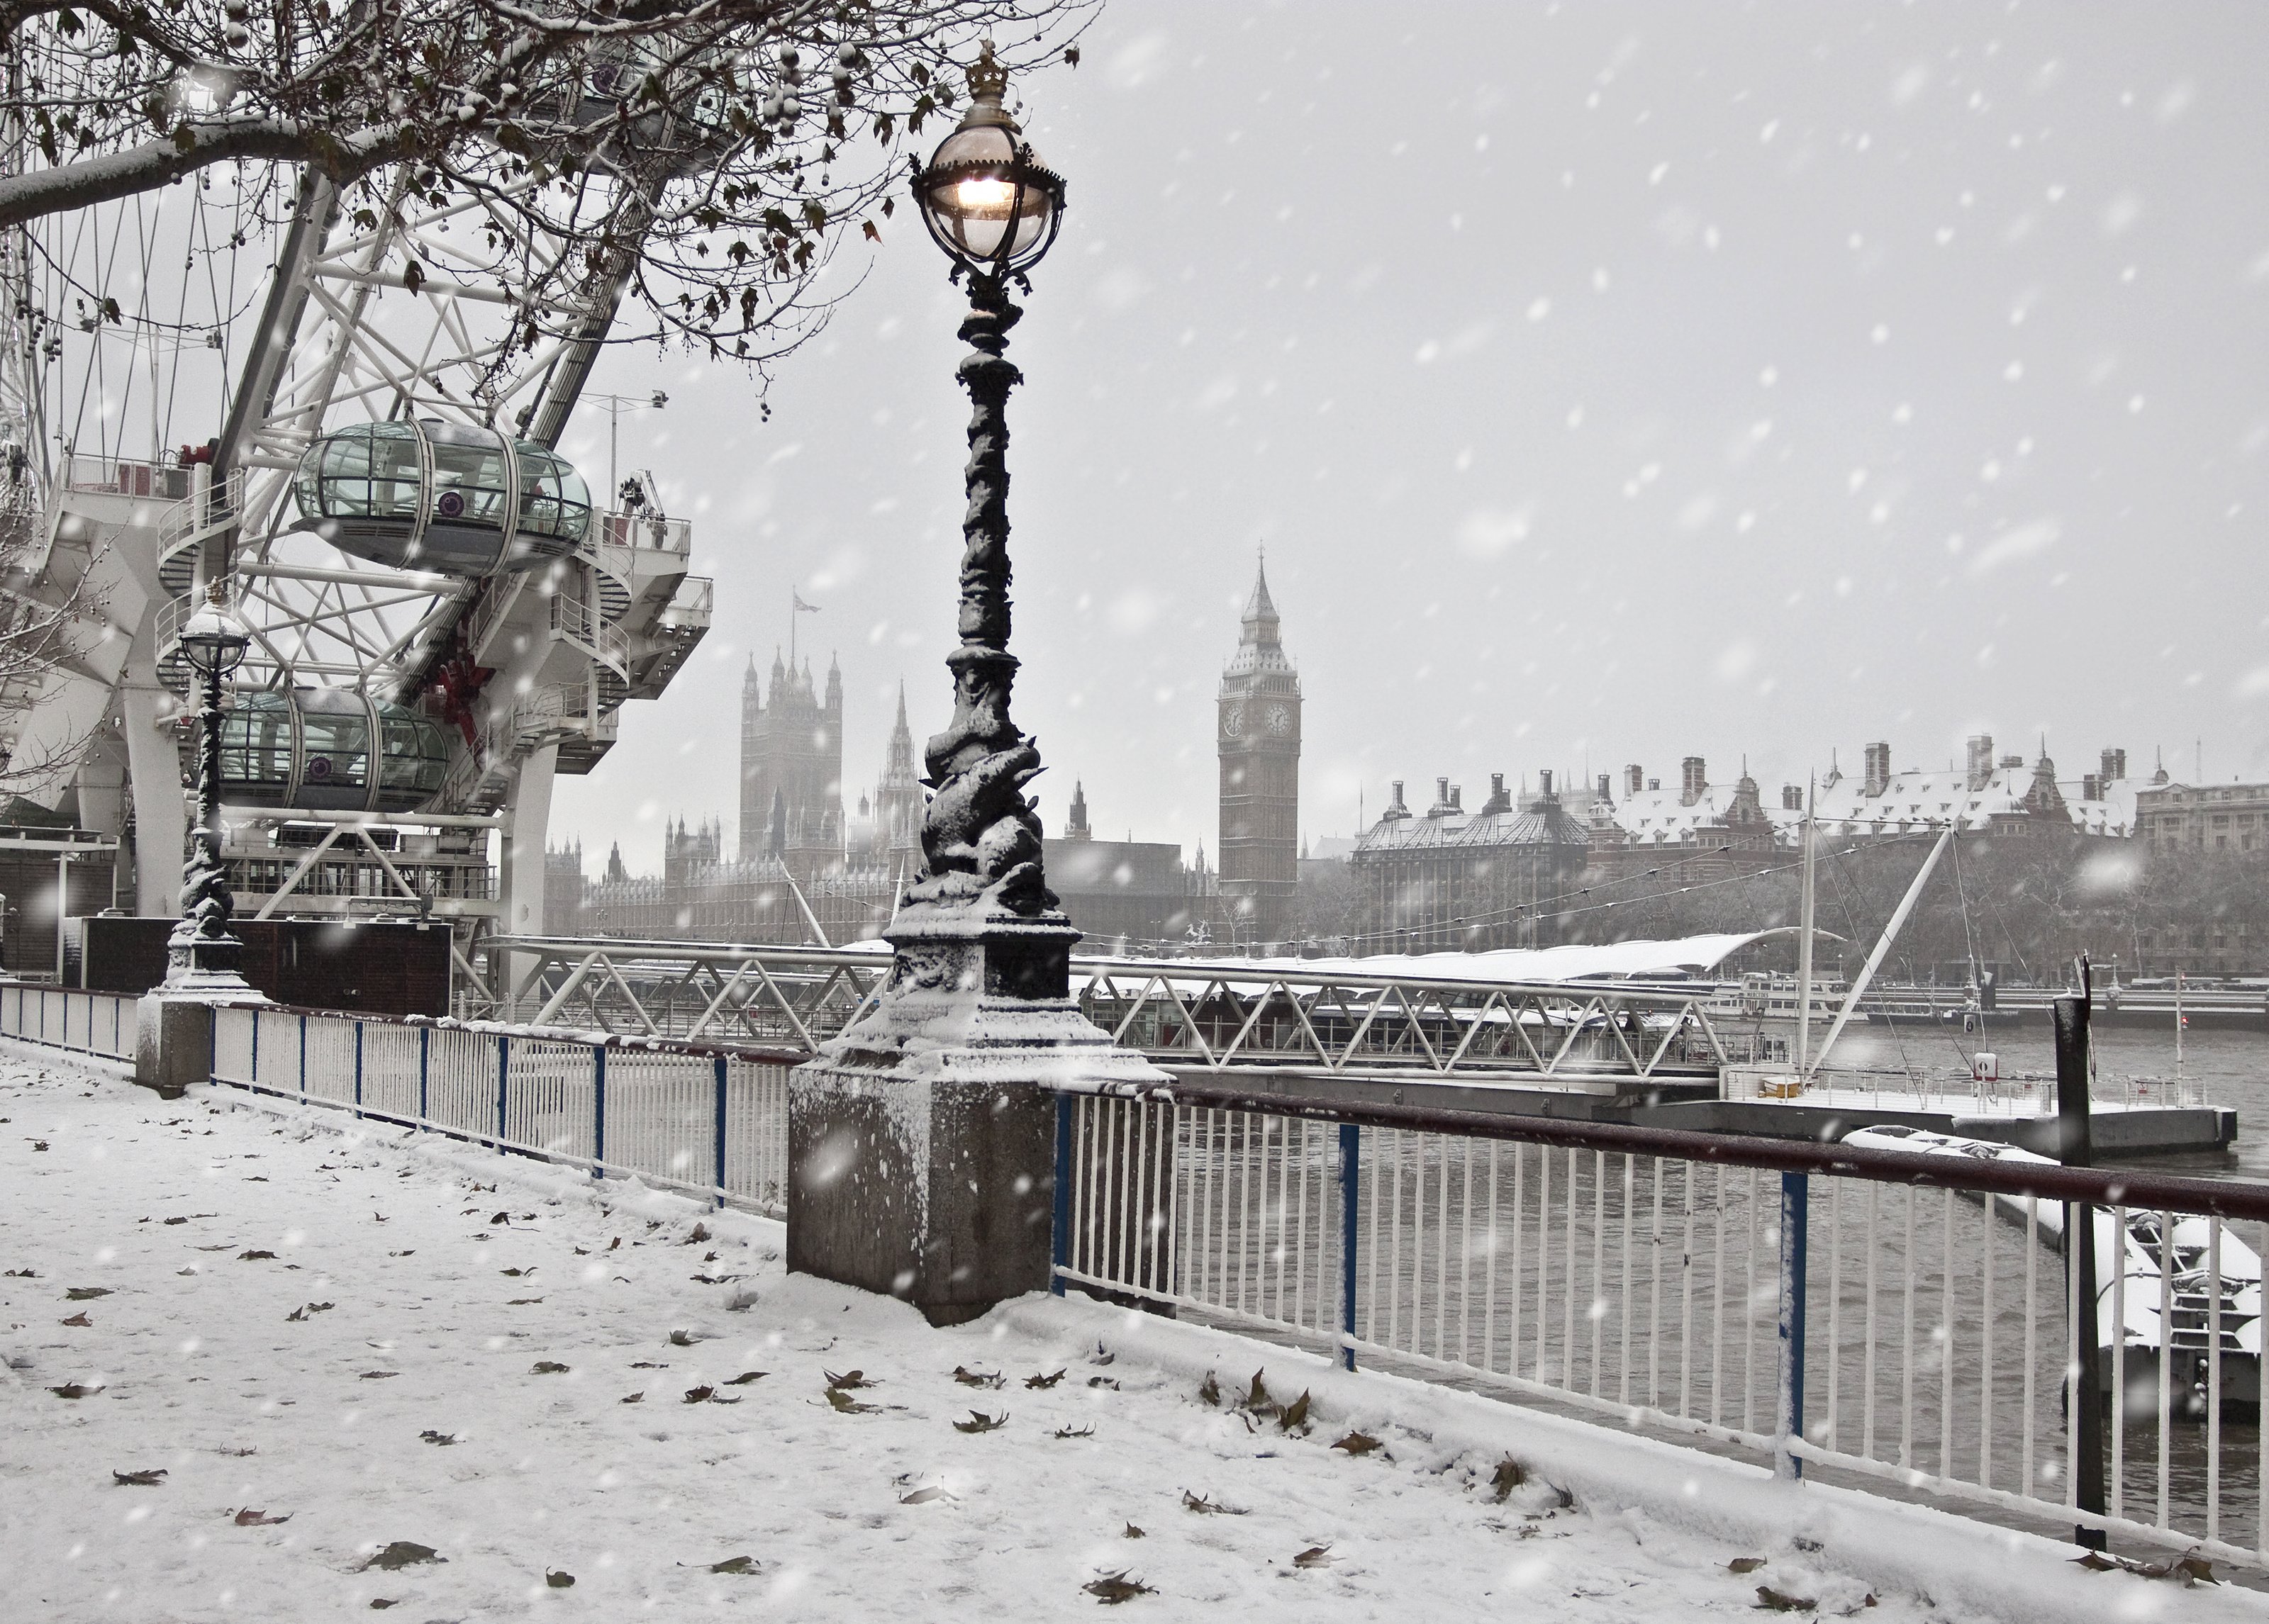 Magical Holiday Traditions In London!